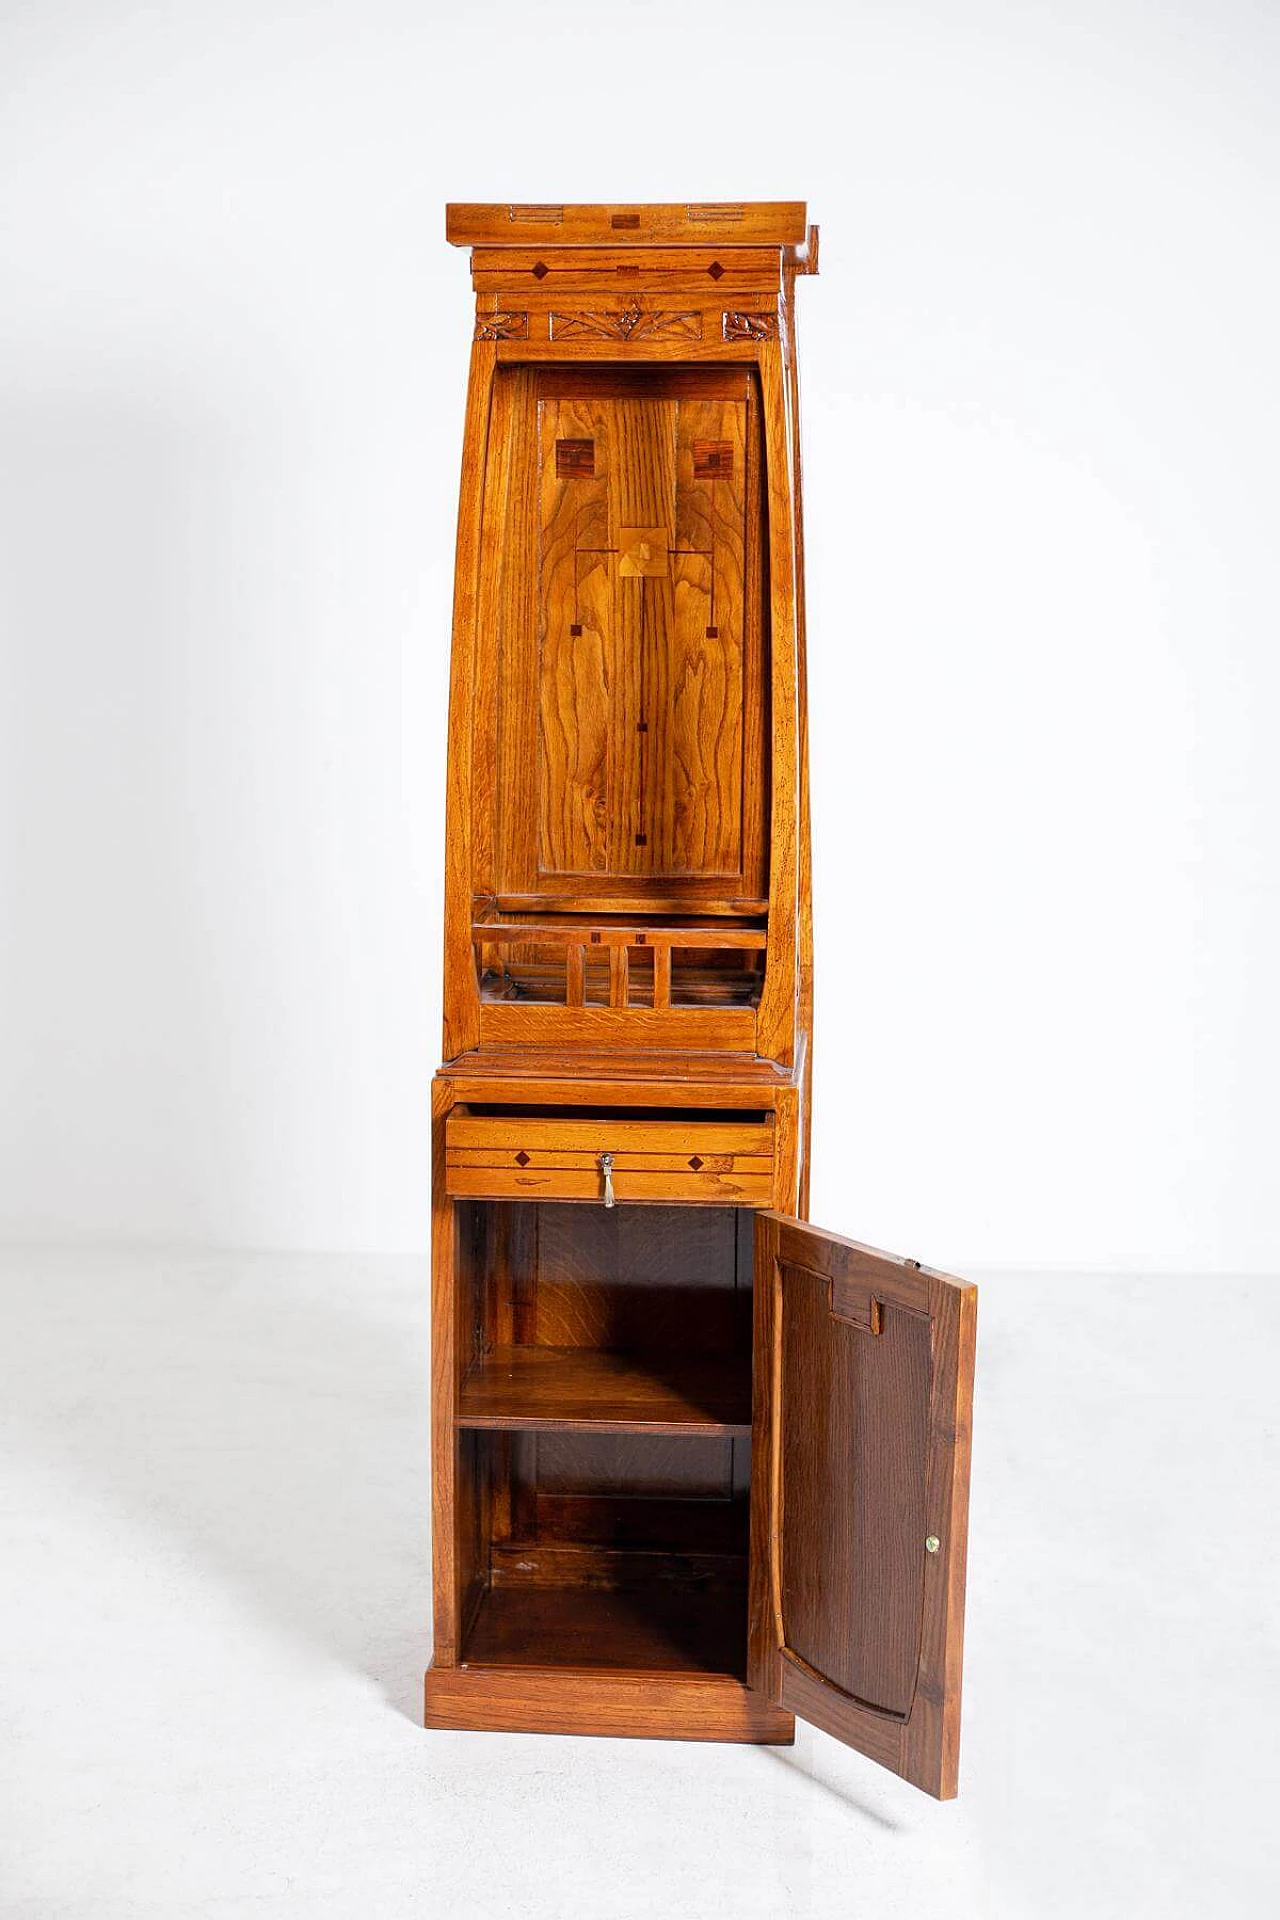 Carved wooden cabinet in Art Nouveau style, 20th century 1403433